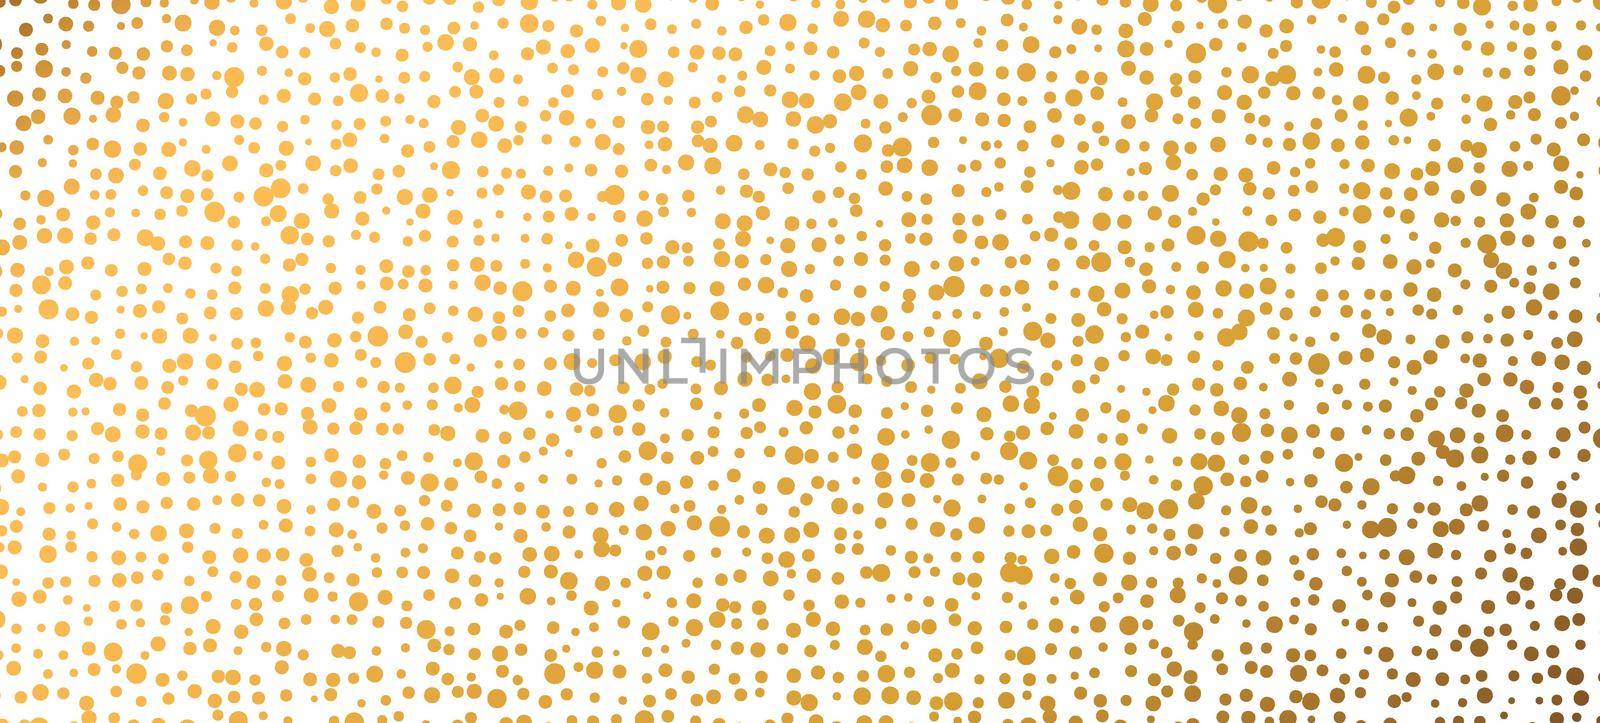 Abstract fashion polka dots background. White dotted pattern with golden gradient circles. Template design for invitation, poster, card, flyer, banner, textile, fabric by allaku